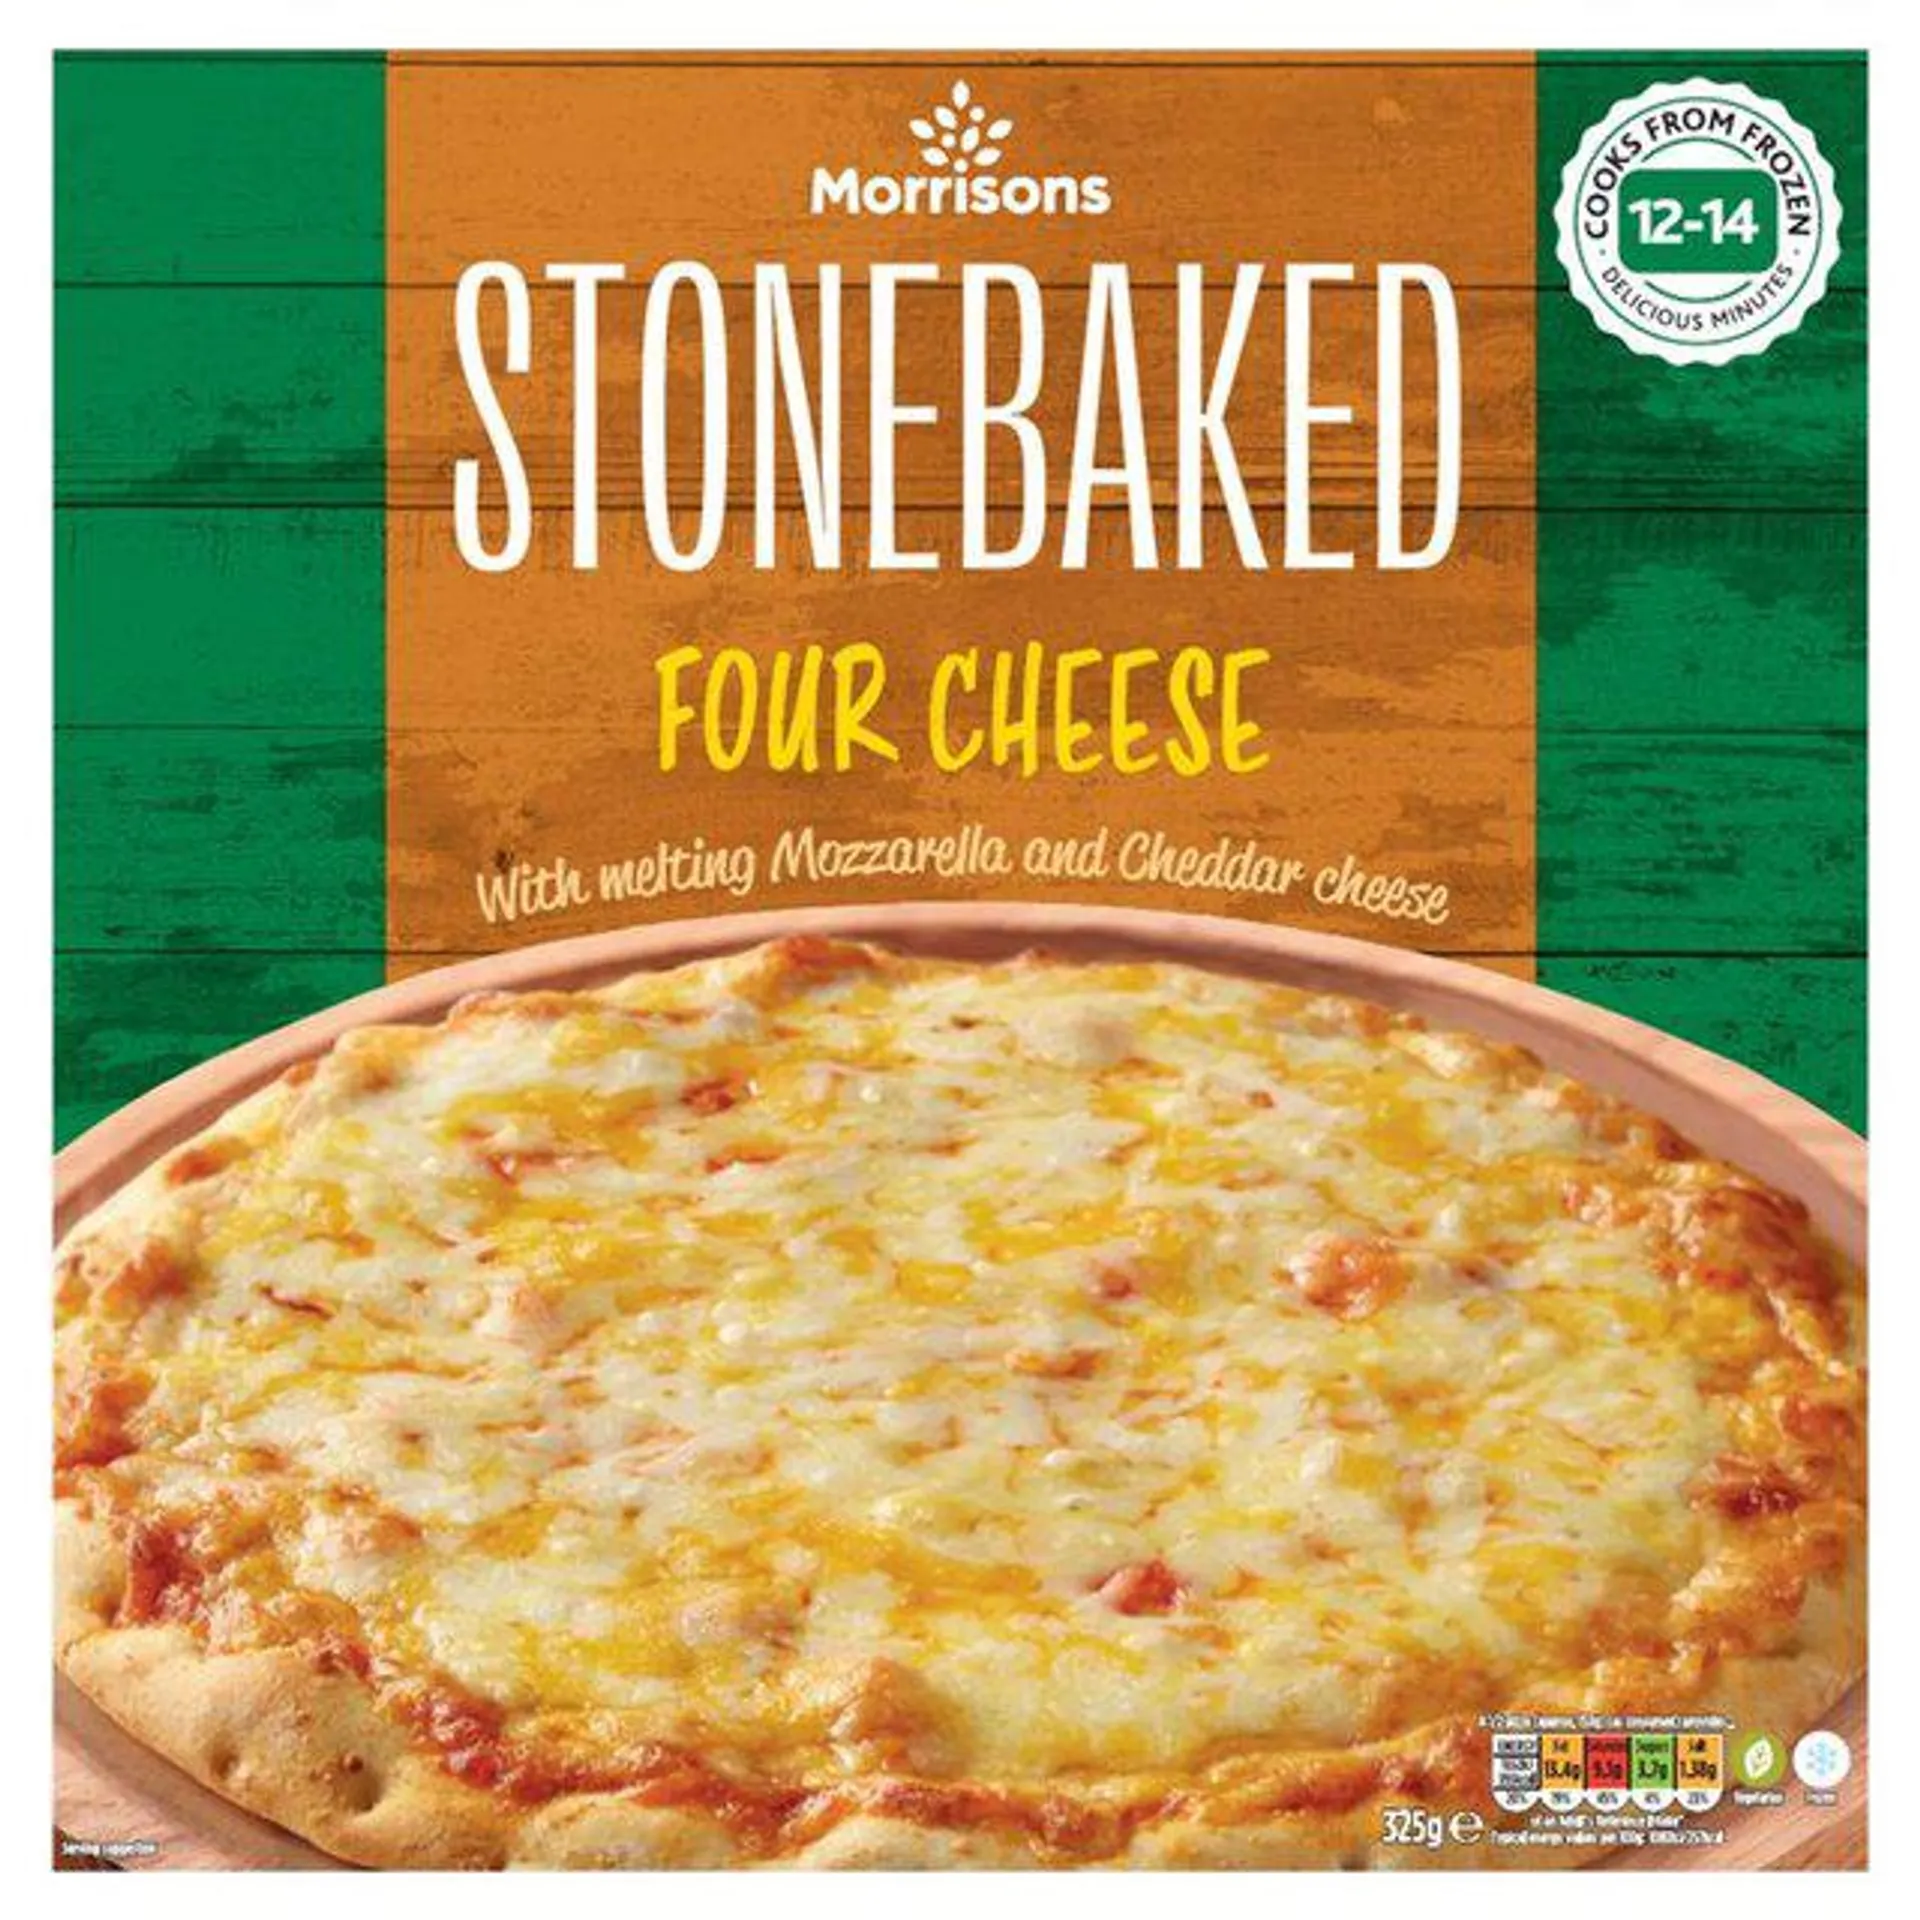 Morrisons Stonebaked Four Cheese Pizza 325g